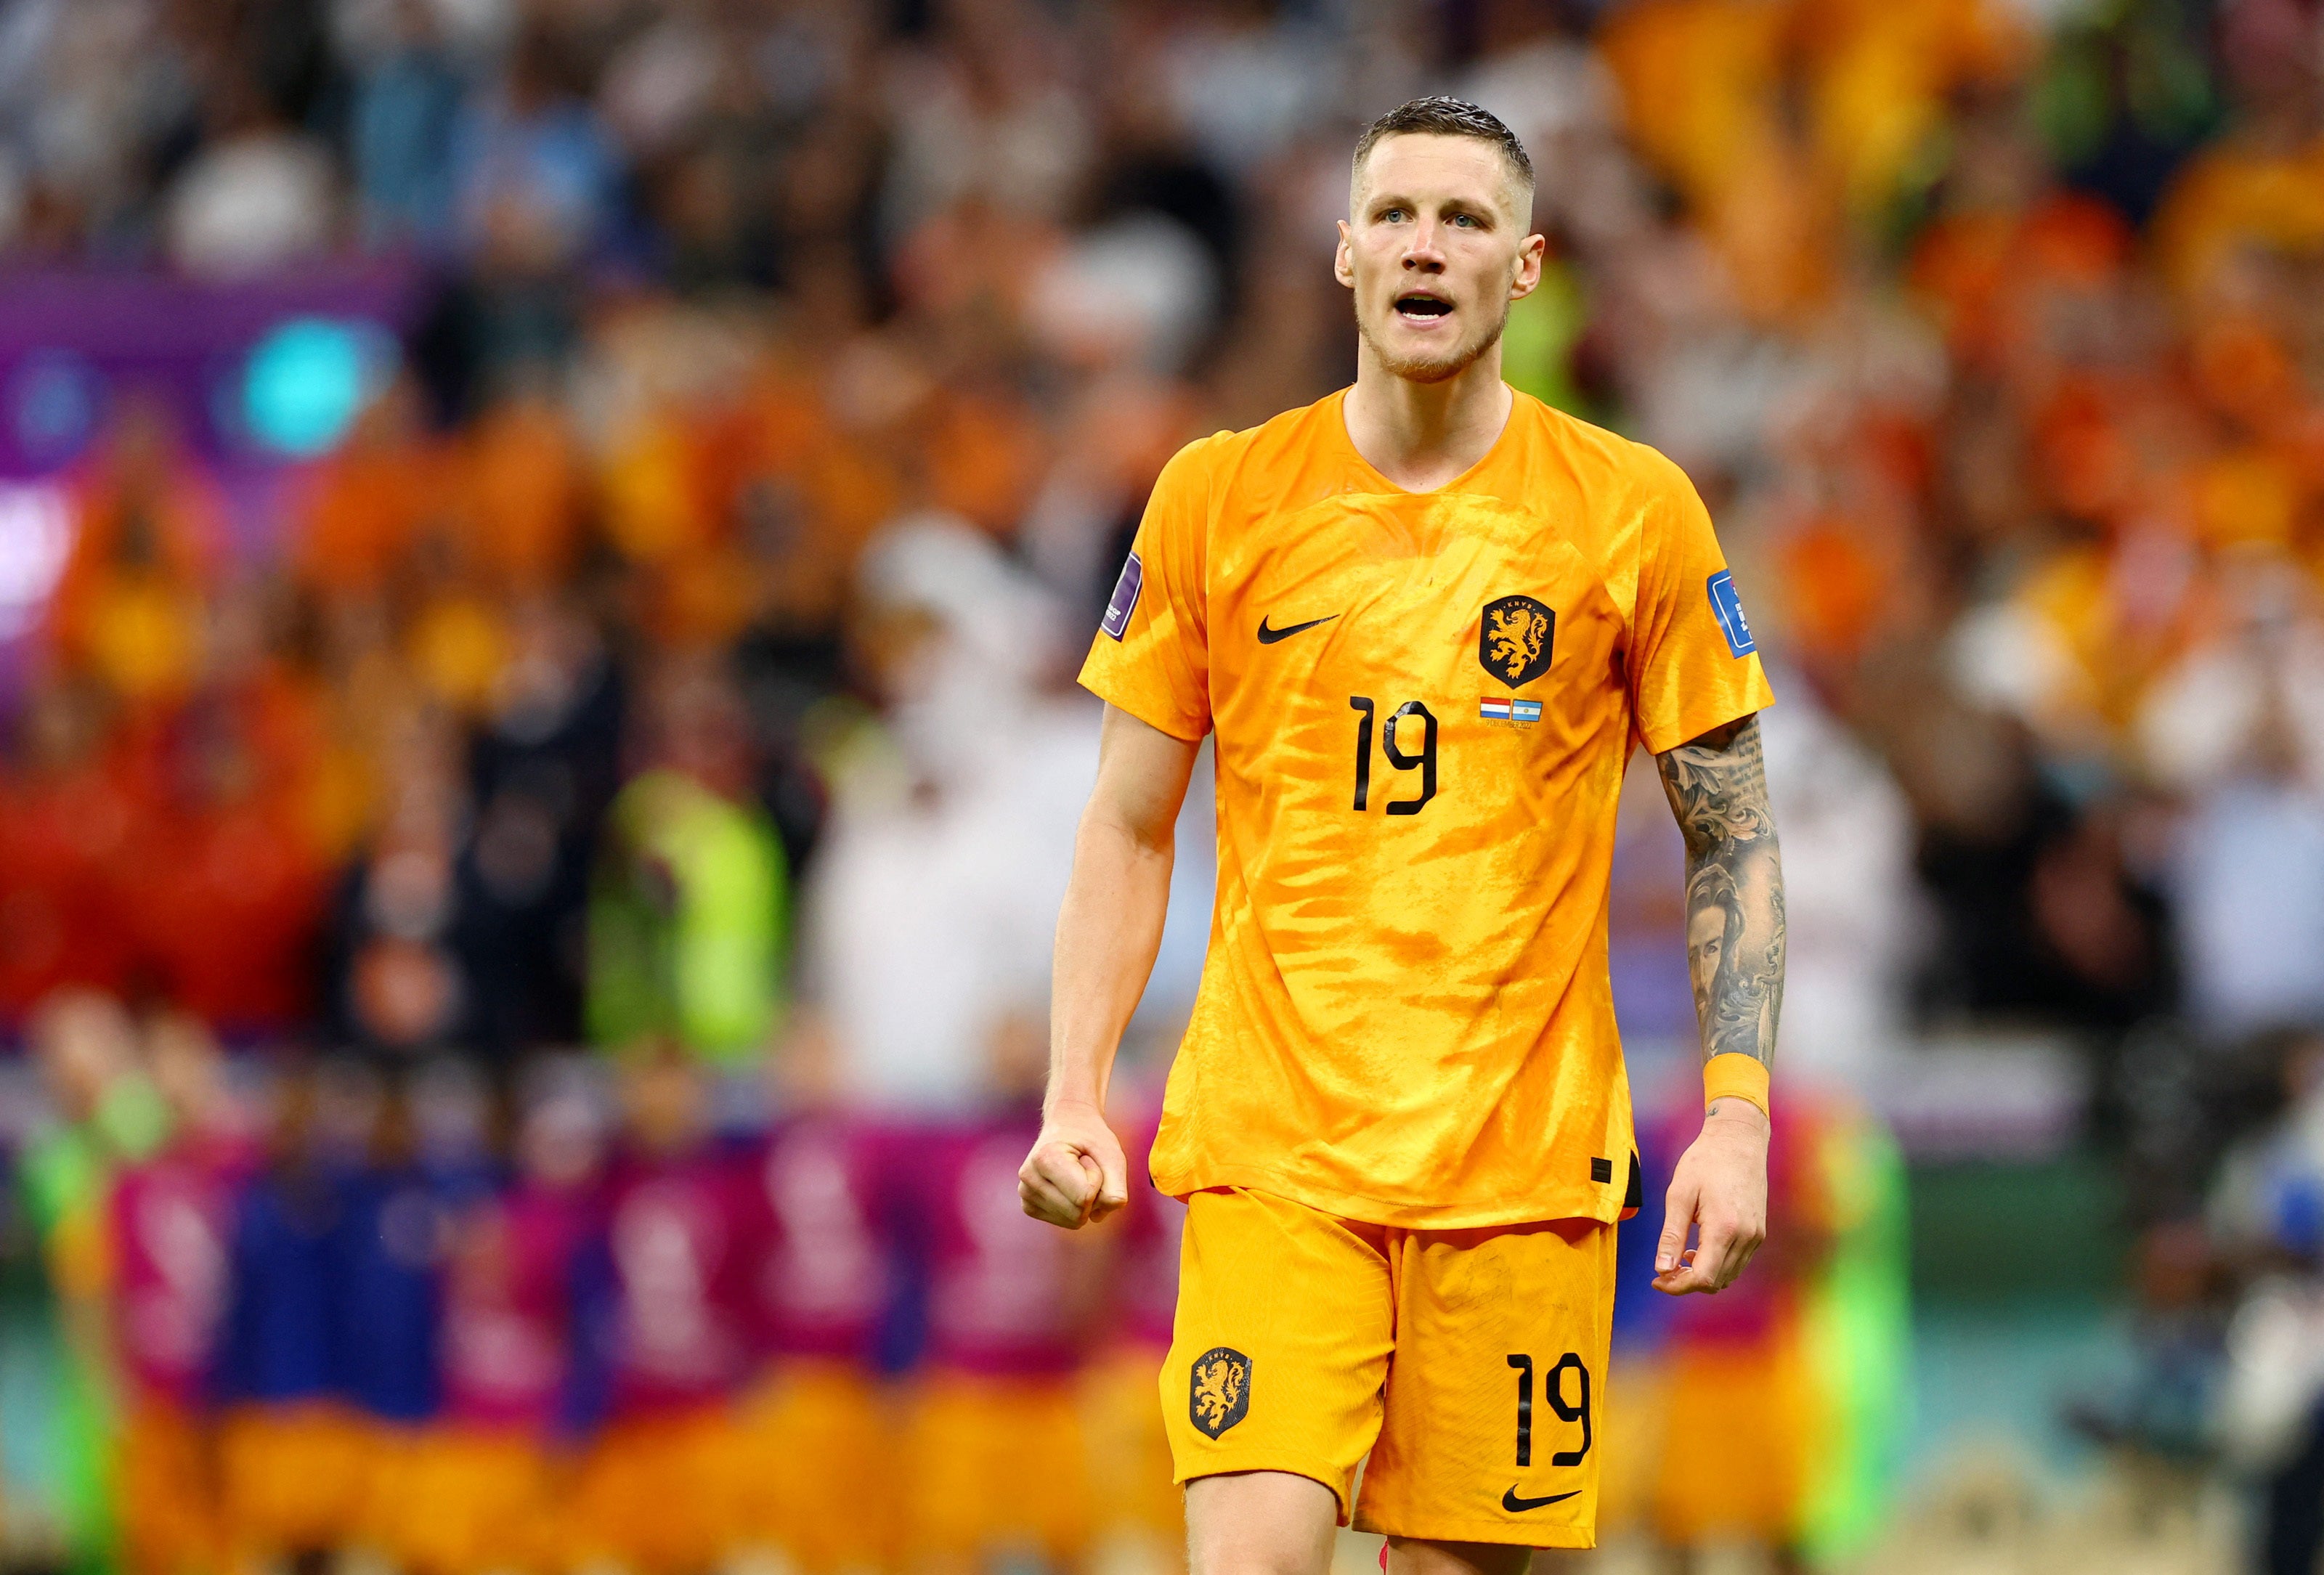 Wout Weghorst made an impact for Netherlands during the World Cup